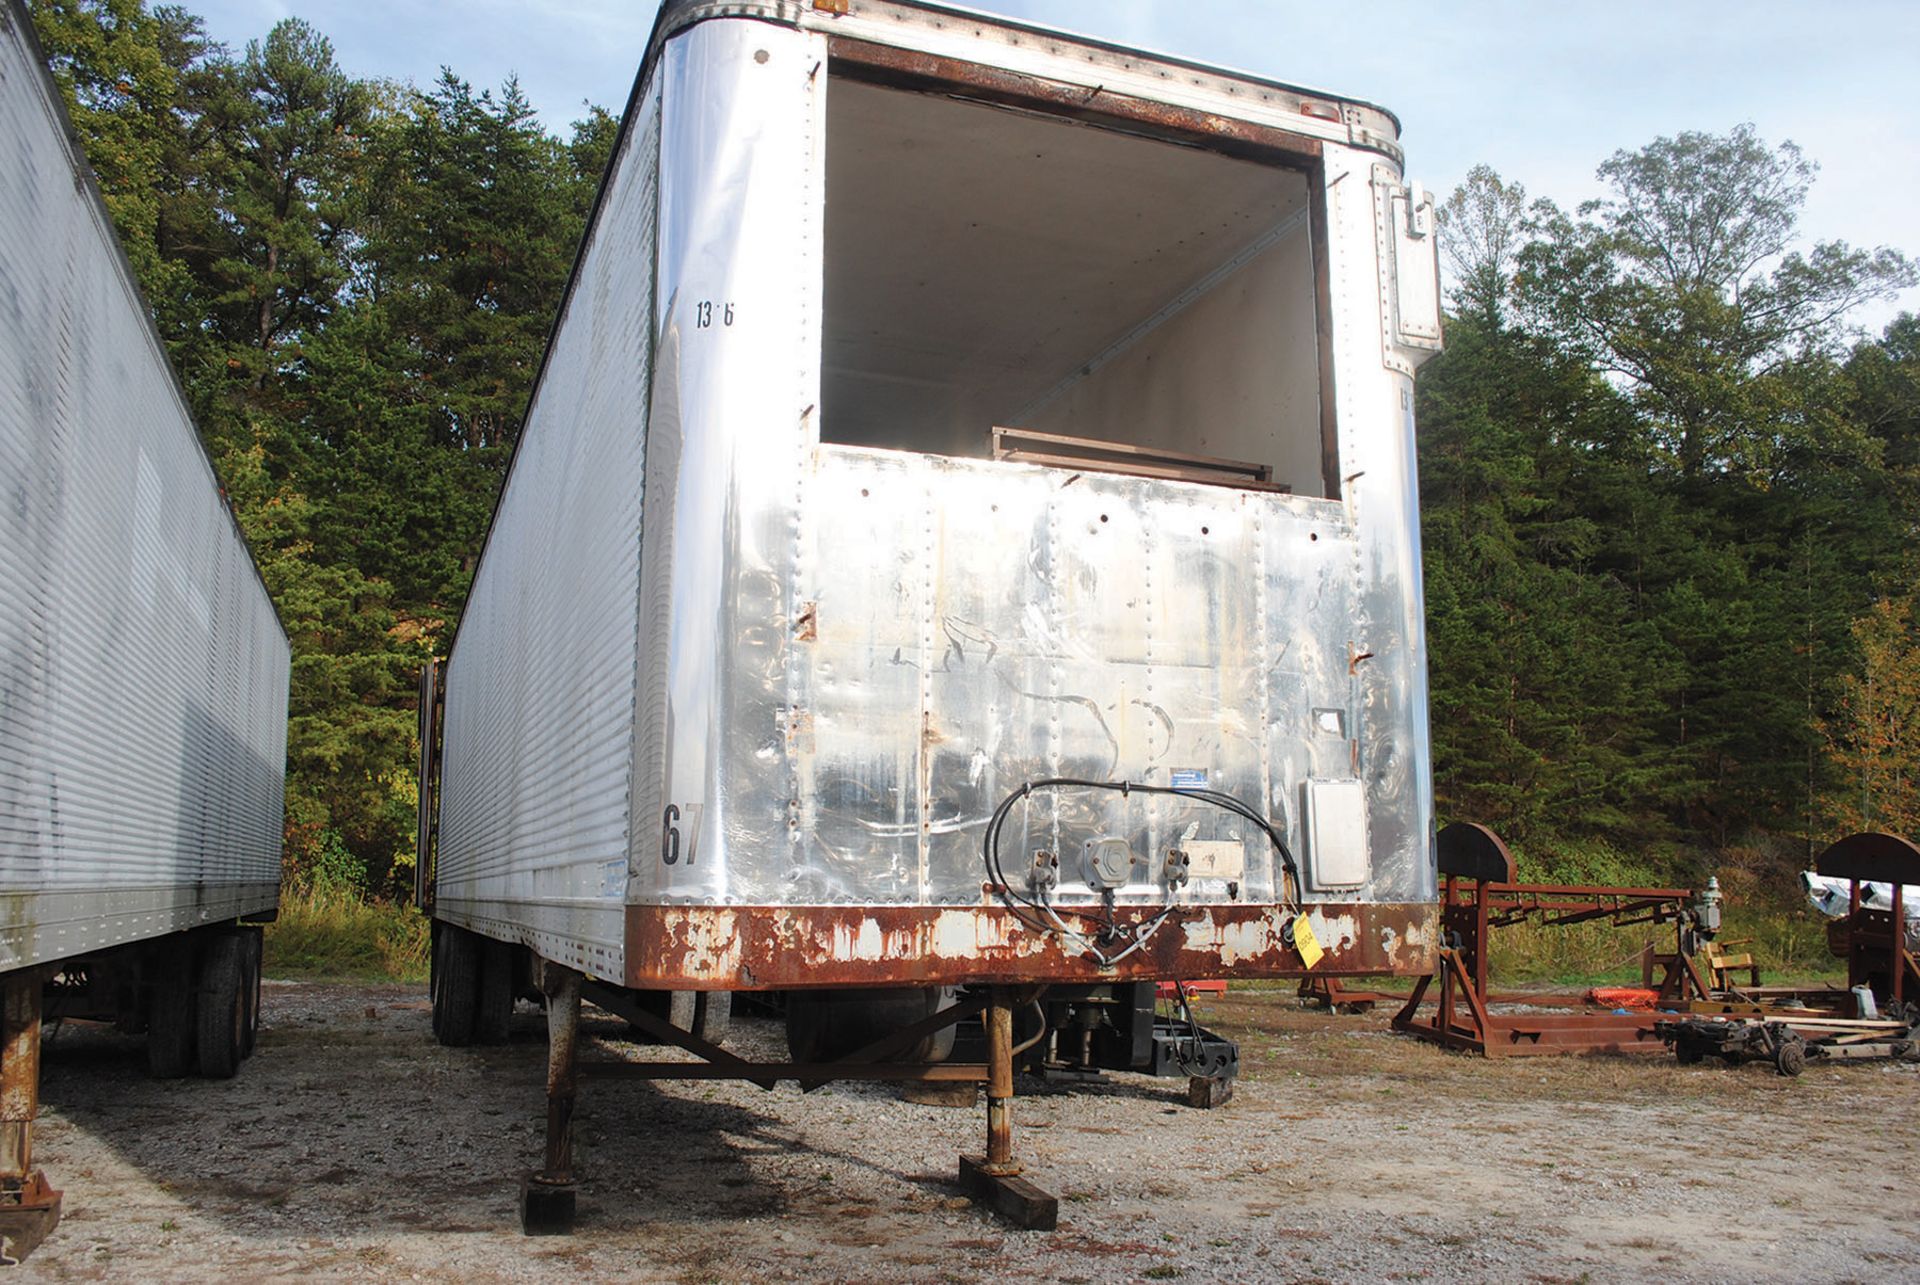 AMERICAN 48'' BOX TRAILER; VIN R04825F3039111 WITH CONTENTS - Image 2 of 2